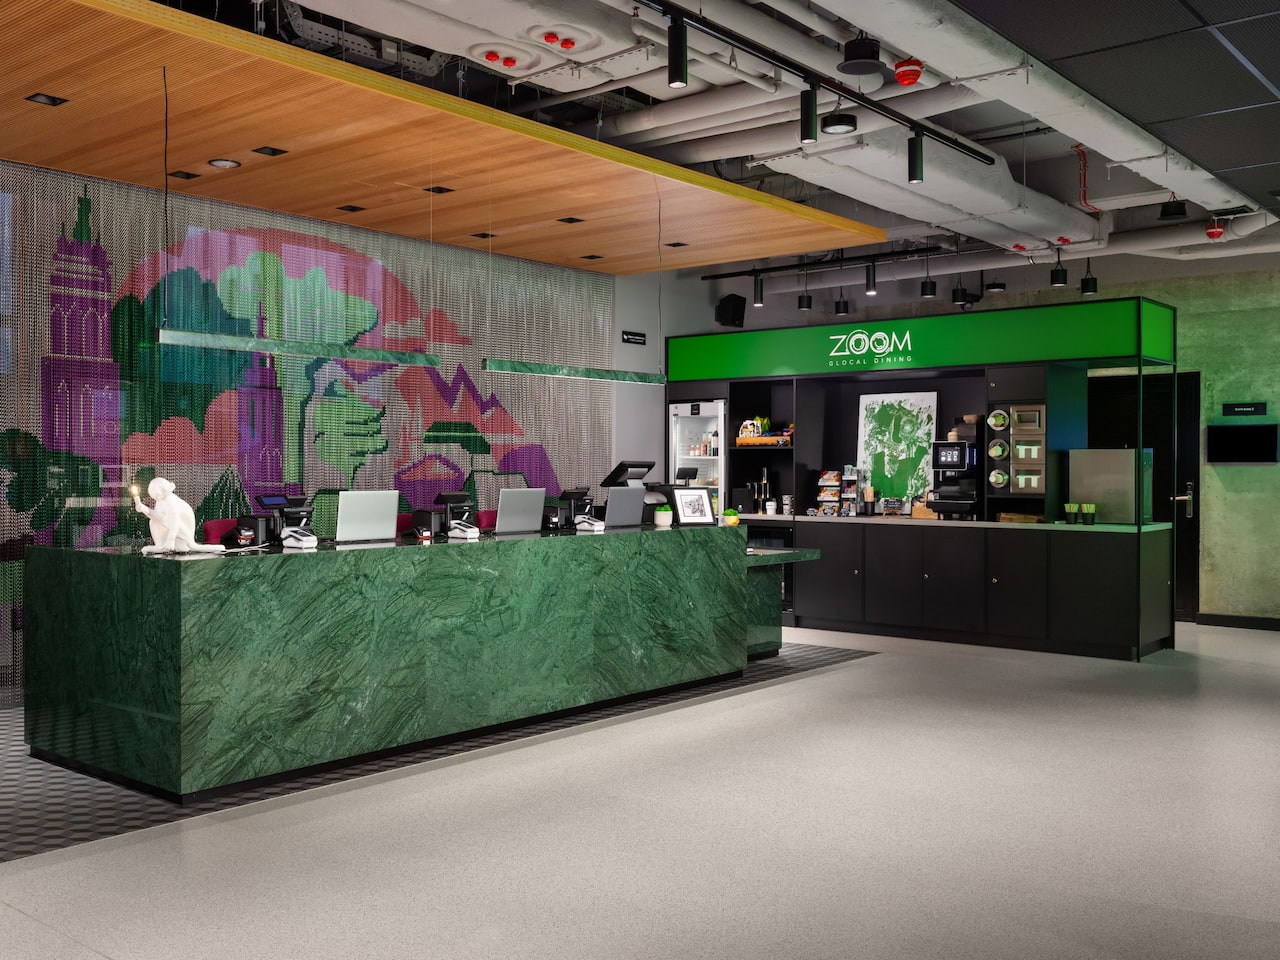 Reception desk and The Market with 24/7 grab-and-go convenience